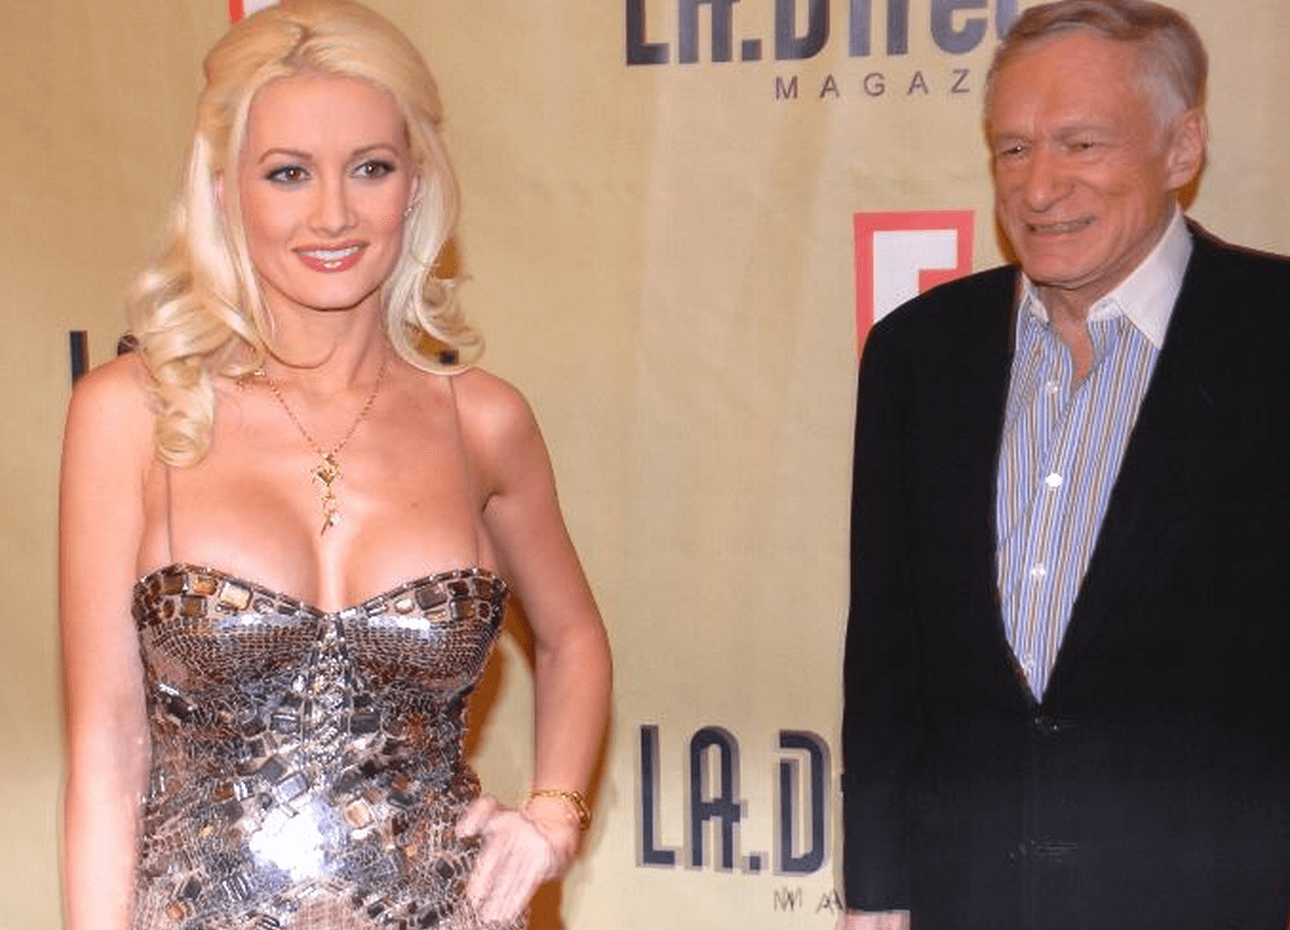 Kendra Sleeping Fuck Boy Vedio - 33 Juicy Details About Playboy, 'The Girls Next Door' And Life Inside The  Mansion From Holly Madison's Tell-All | Thought Catalog